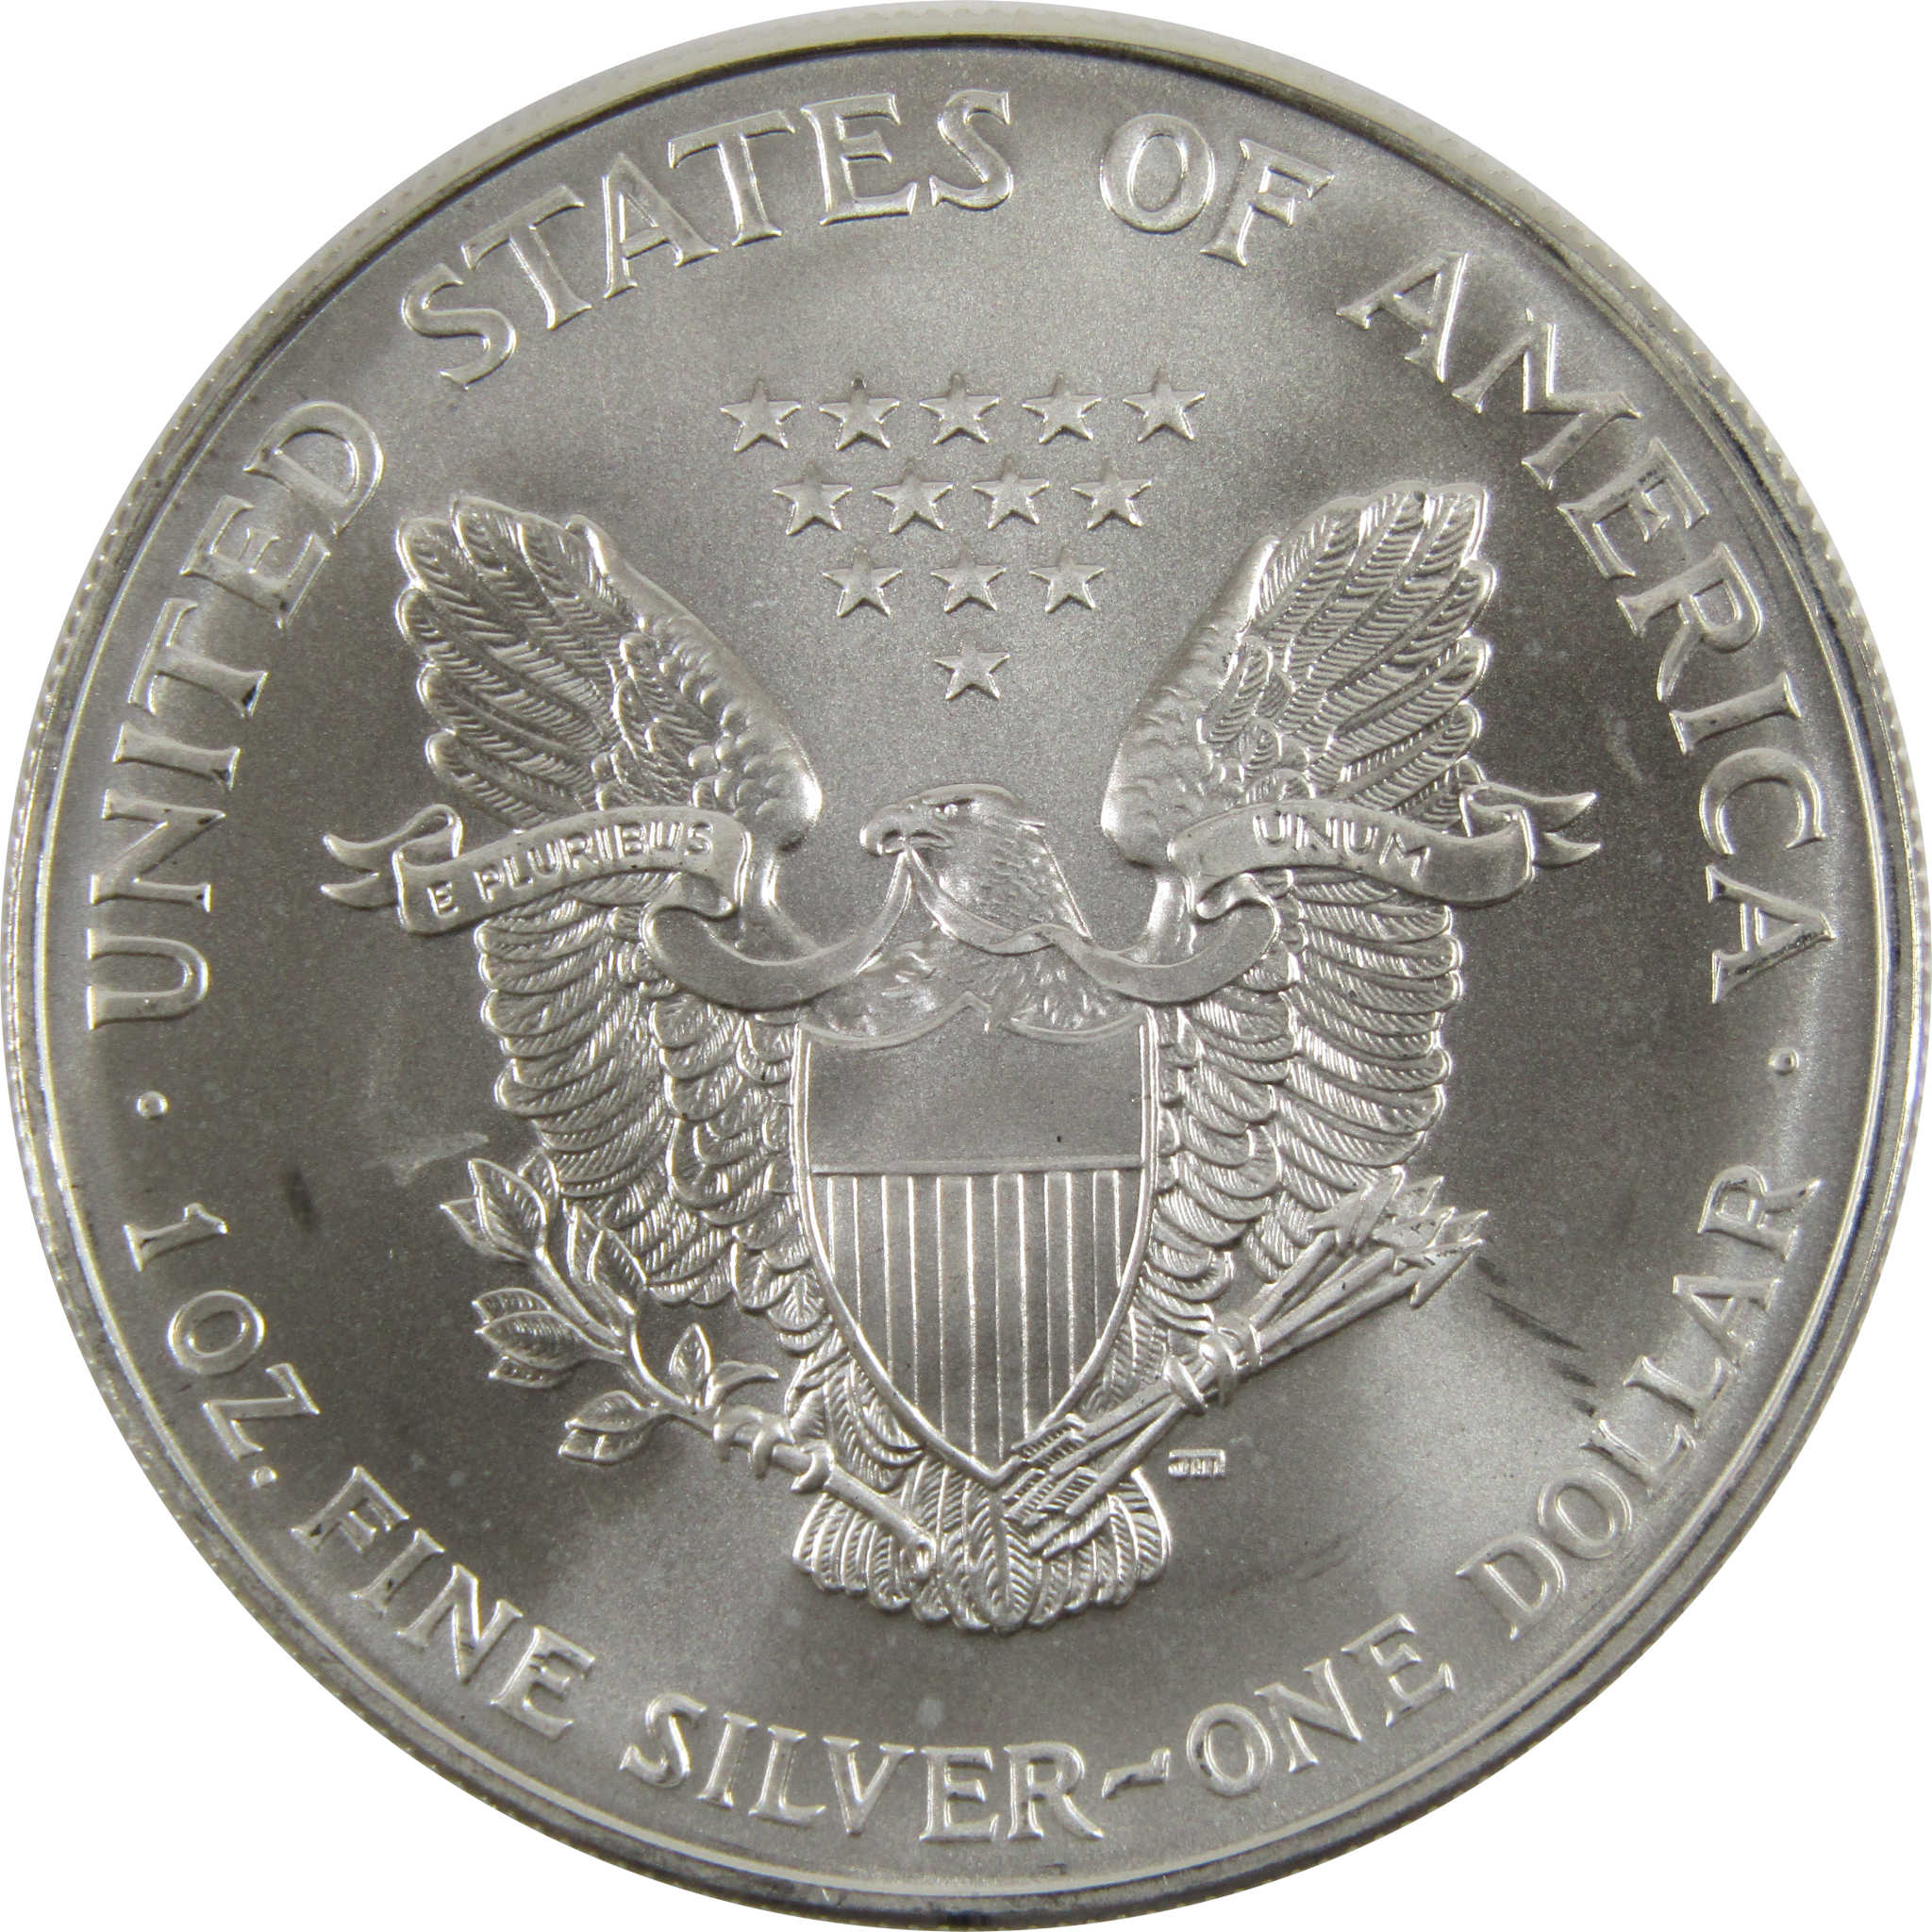 Value of 2001 $1 Silver Coin